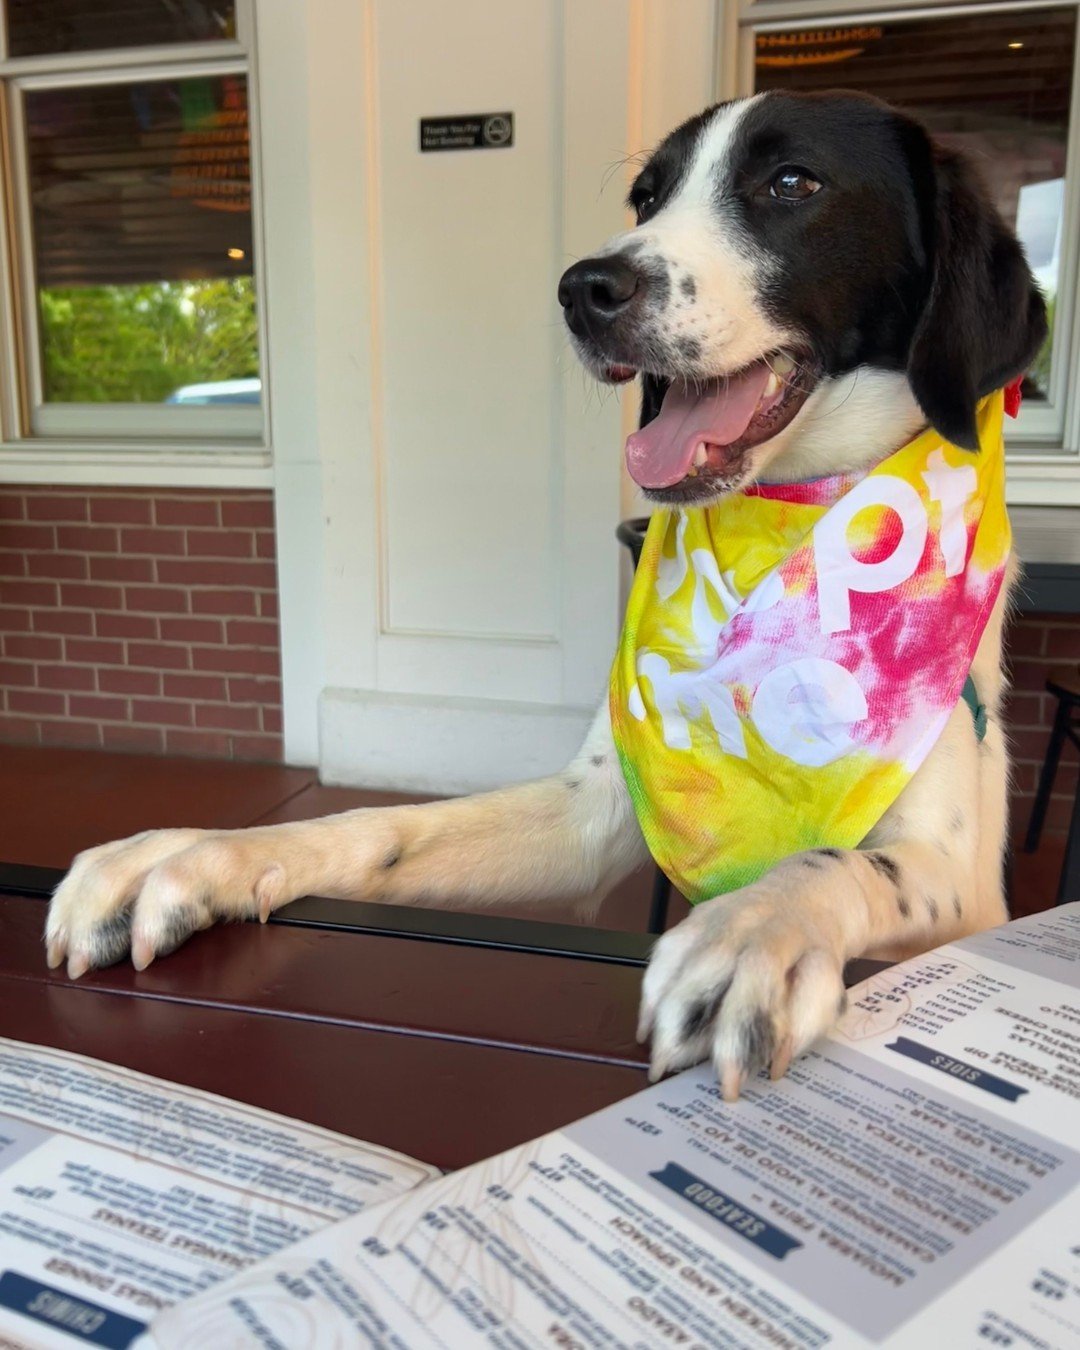 We're not sure if that's an Adopt Me bandana or bib that Springer is wearing on the Plaza Azteca patio, but either way, he is ready for some lunch and attracting an adopter at the same time.

Springer is always up for an adventure. Be it a run around